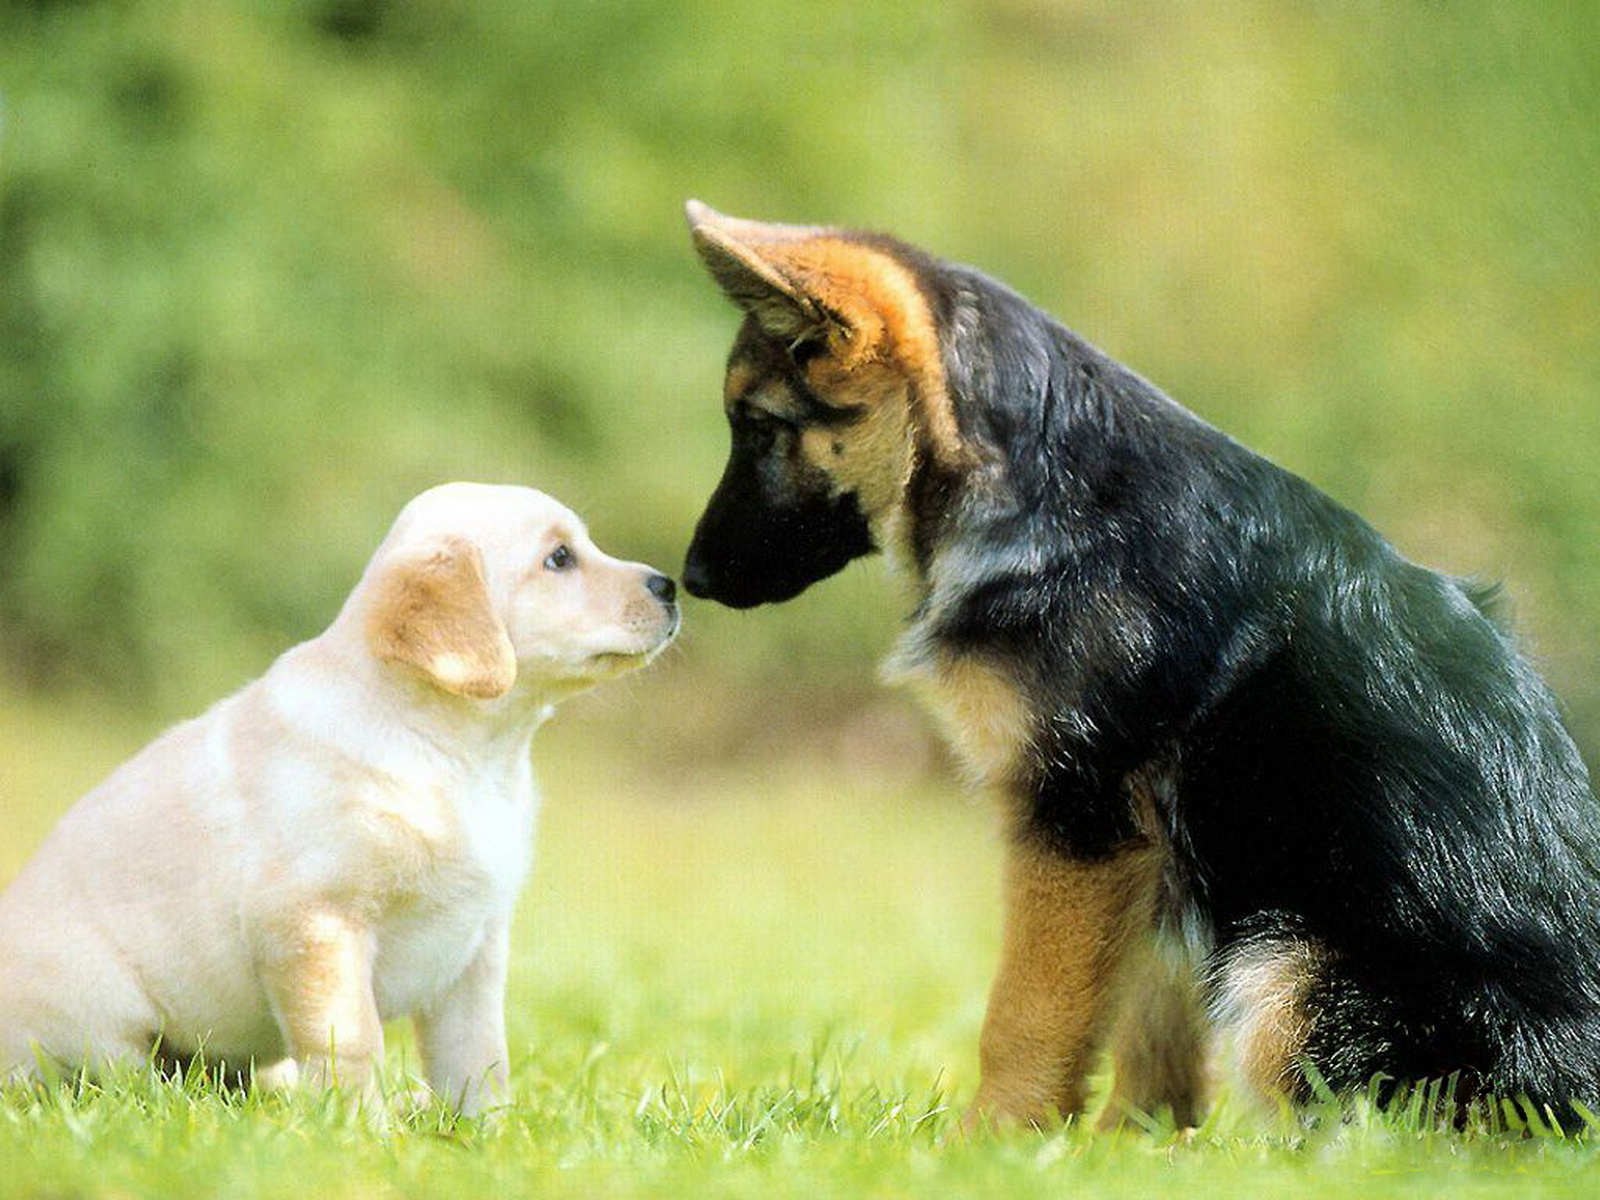  dogs care and affection amongst dogs love contrast cute dogs dogs in